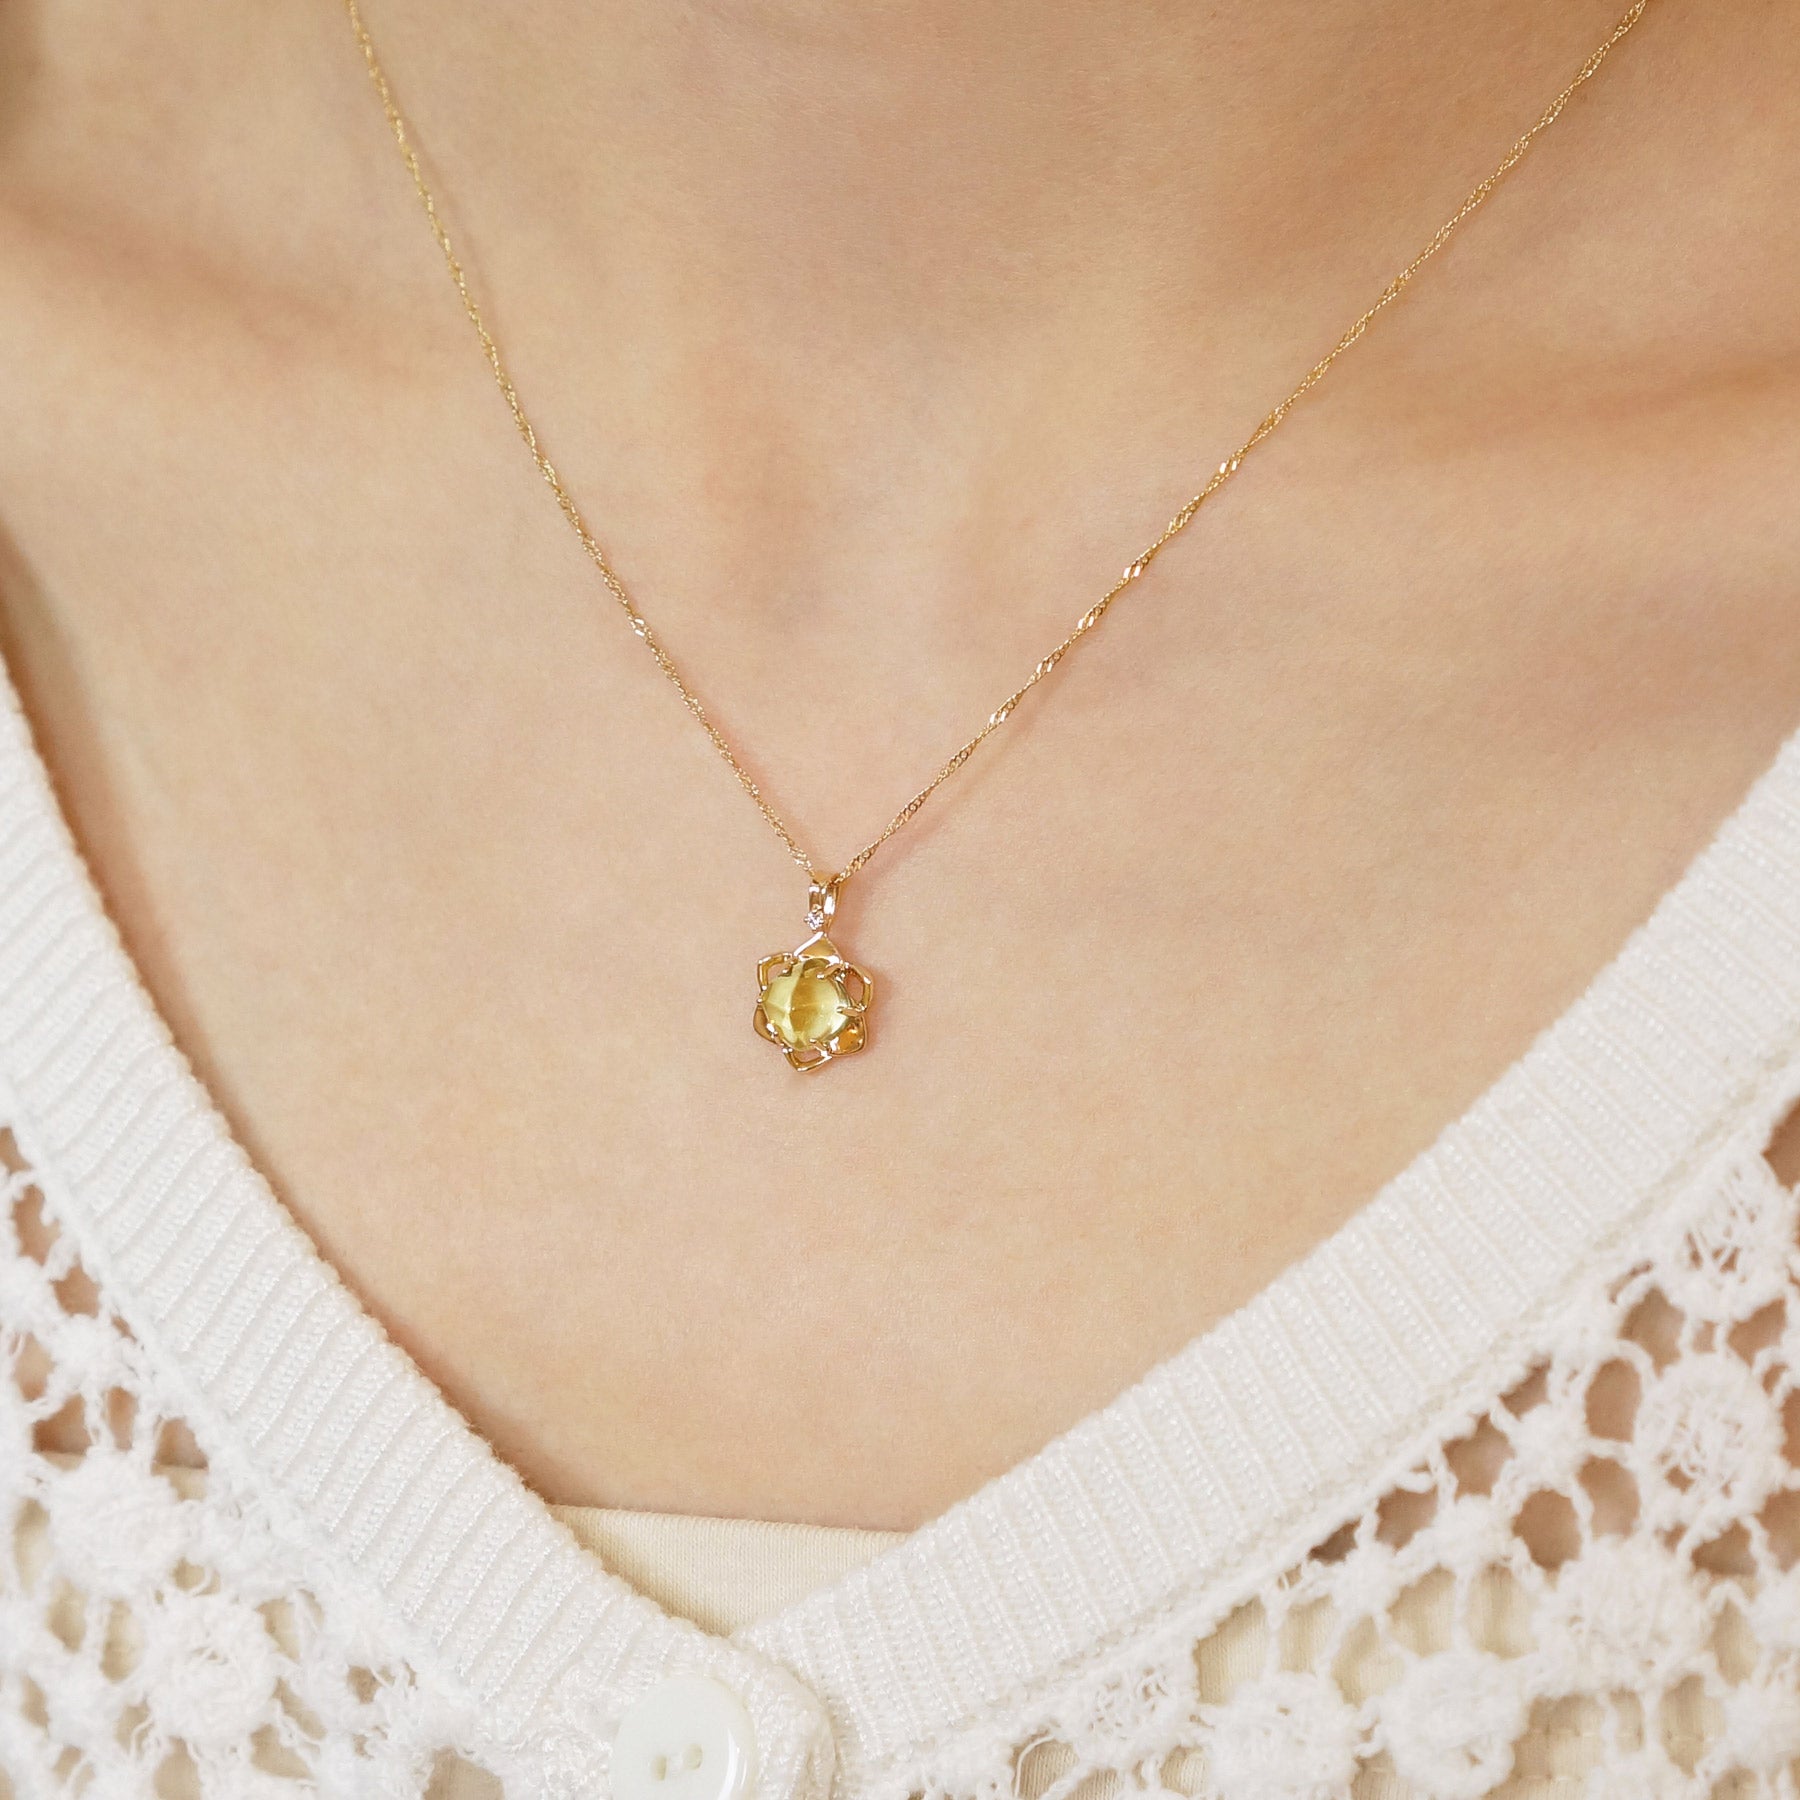 [GARDEN] 10K Daffodil Necklace Charm (Yellow Gold) - Model Image